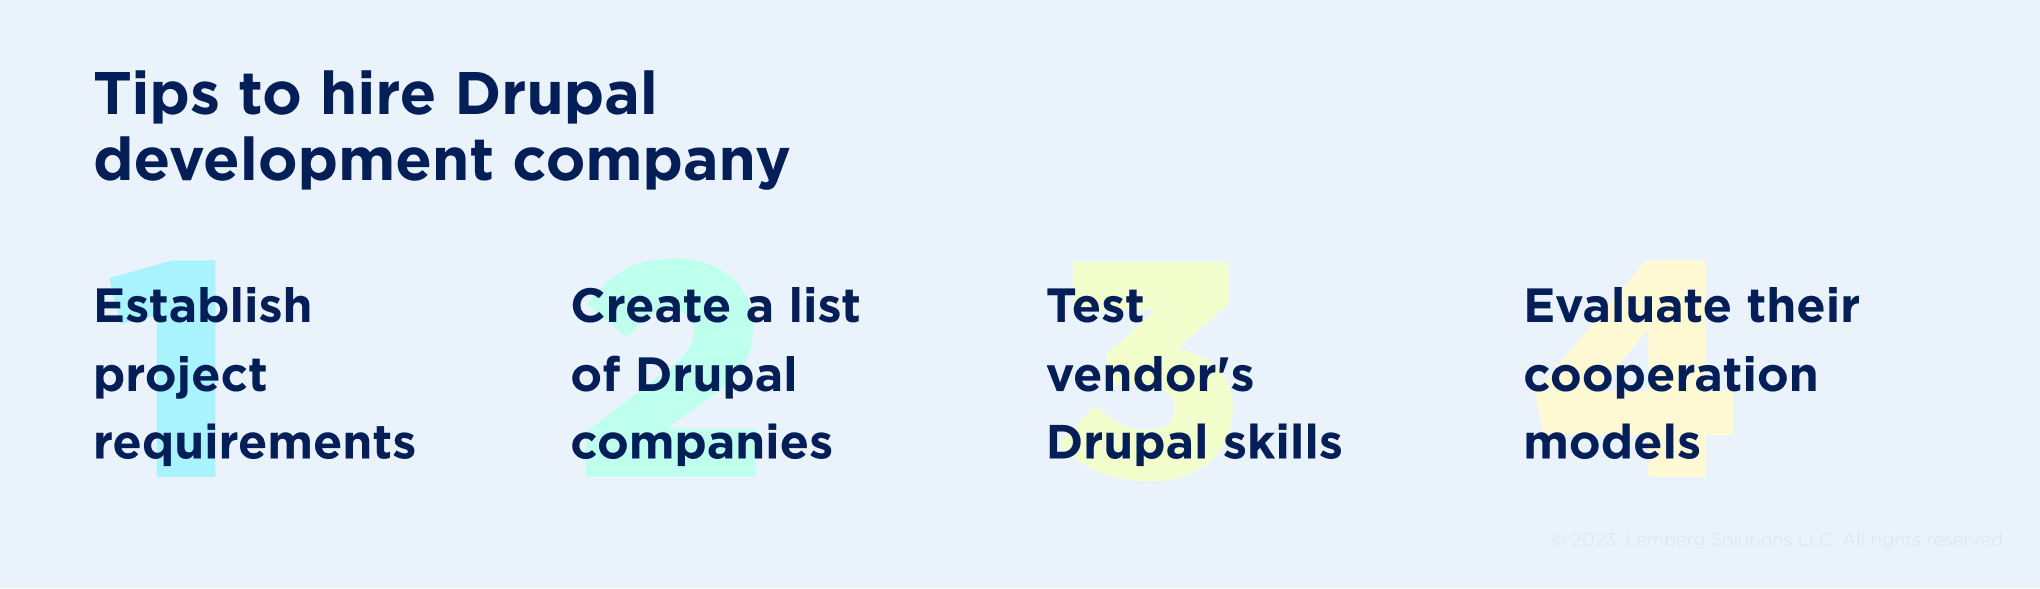 Tips to hire Drupal development company - Lemberg Solutions